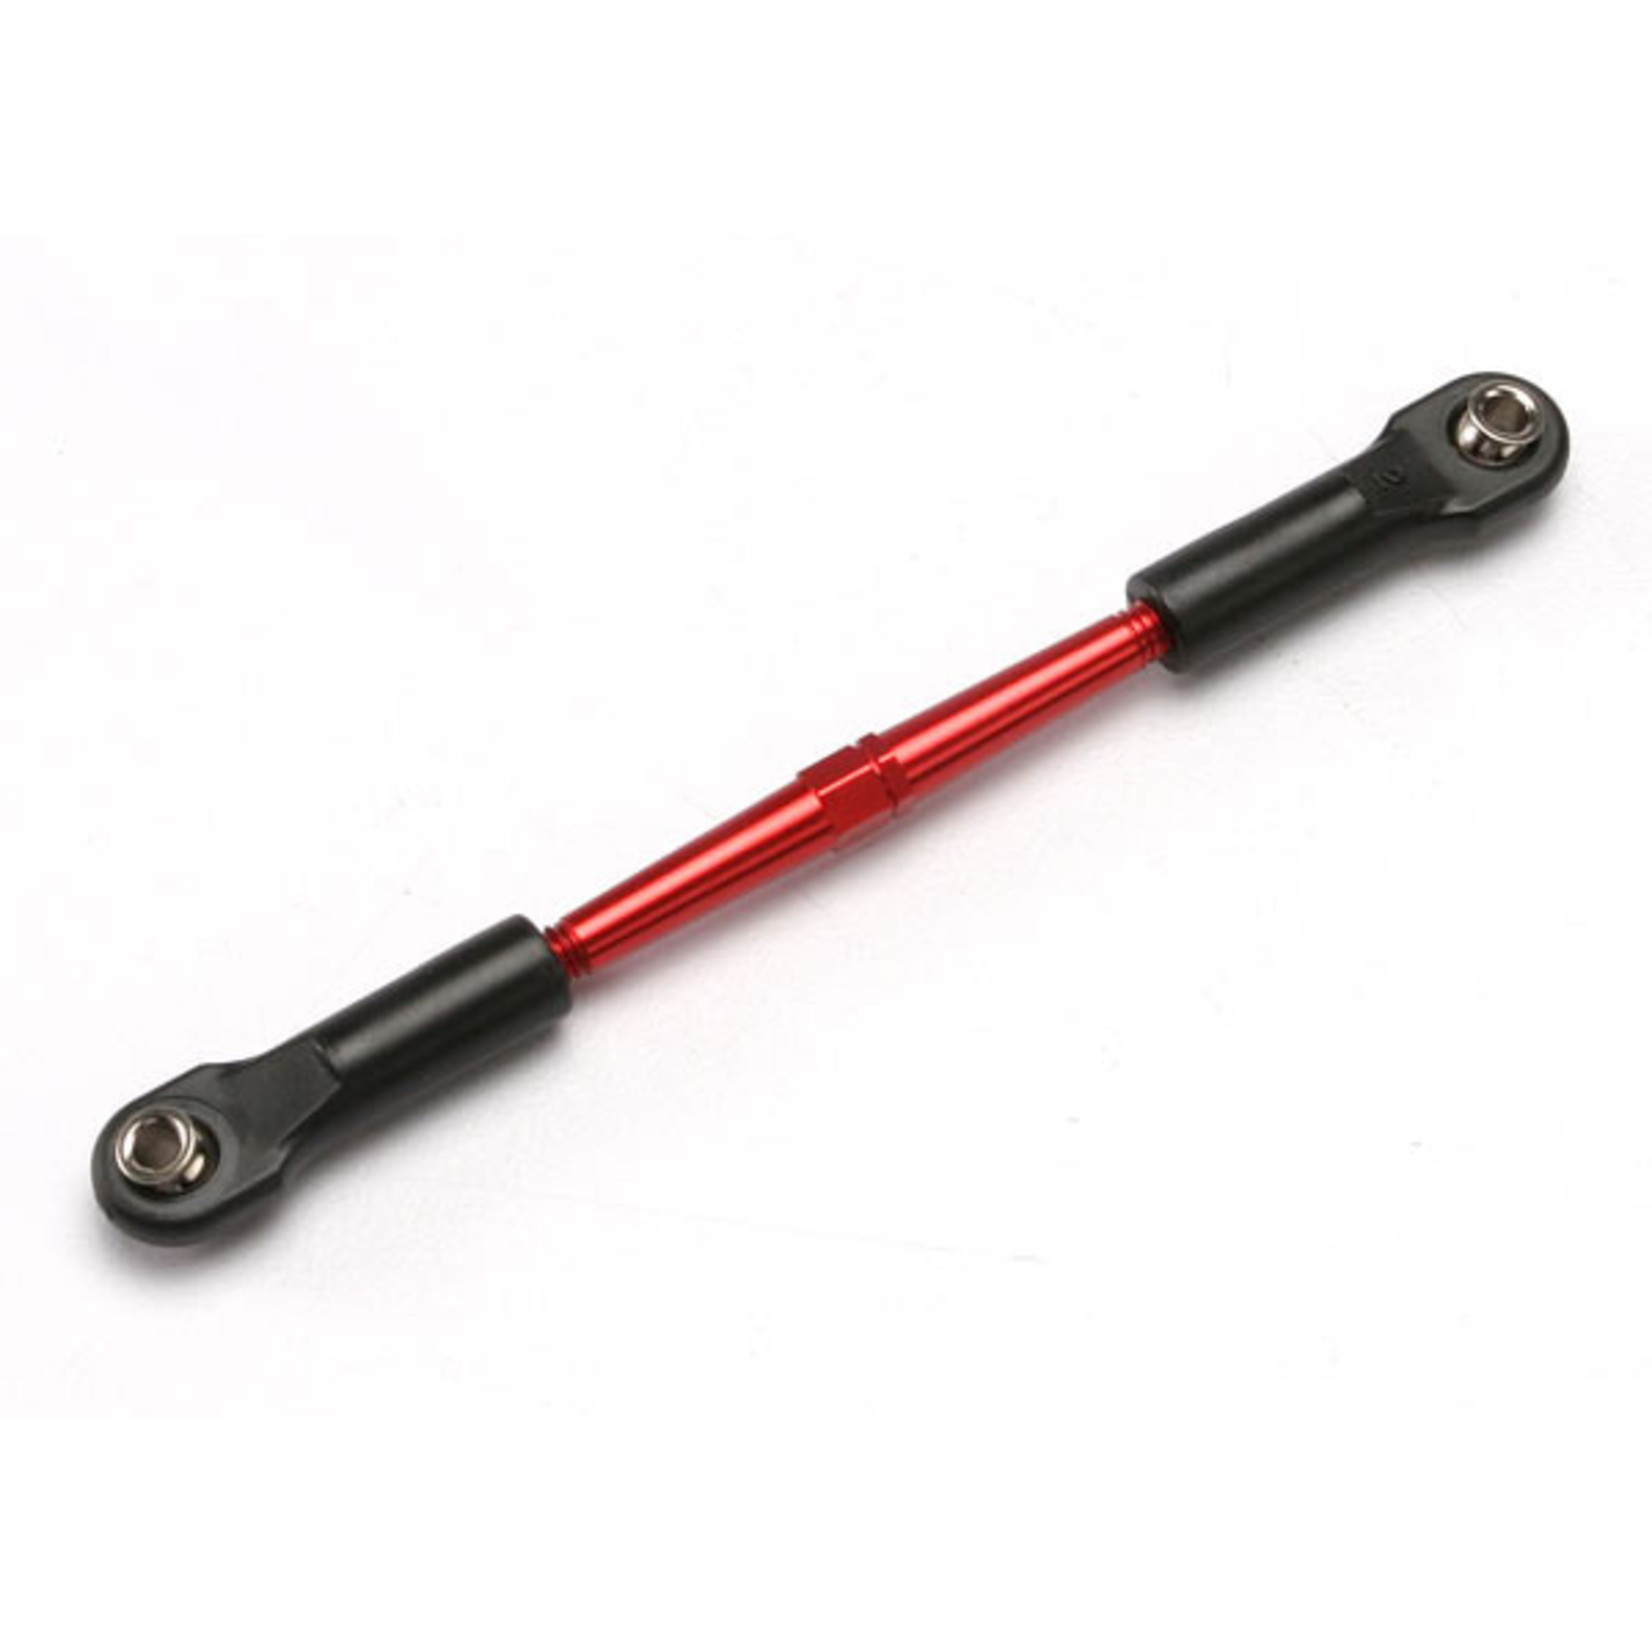 Traxxas 5595 - Turnbuckle, aluminum (red-anodized), front